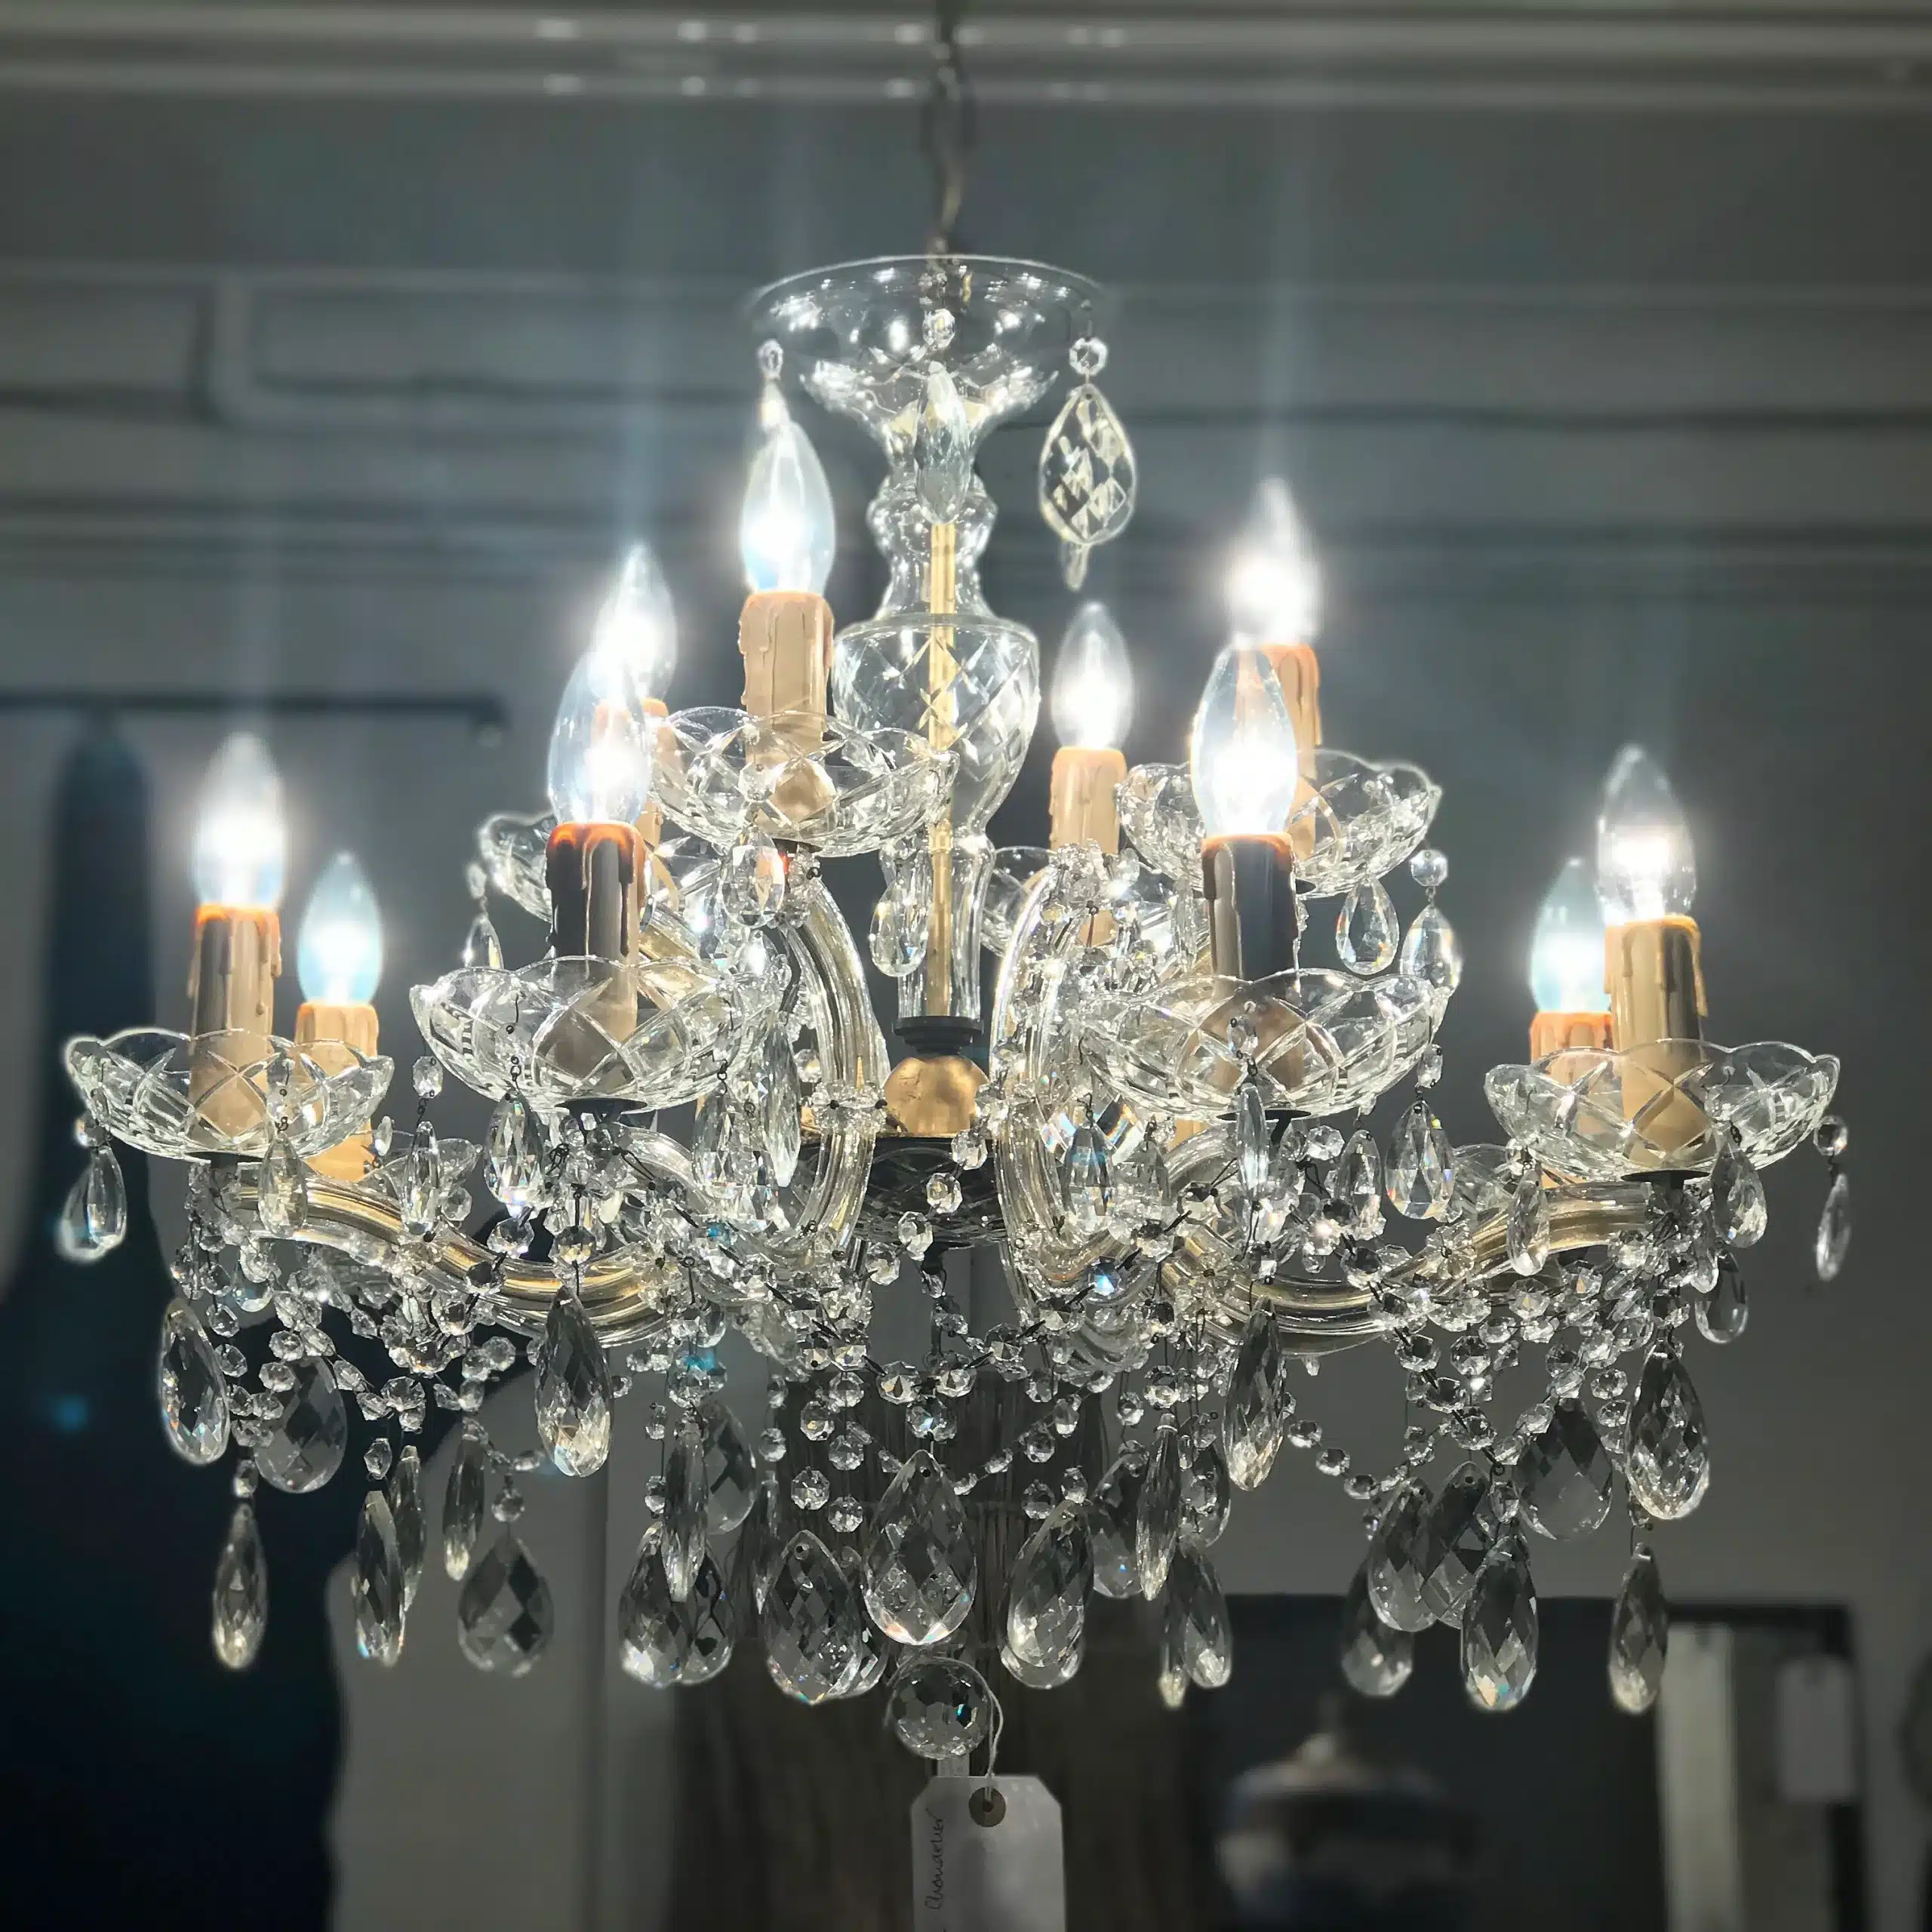 Chandeliers- The Classics